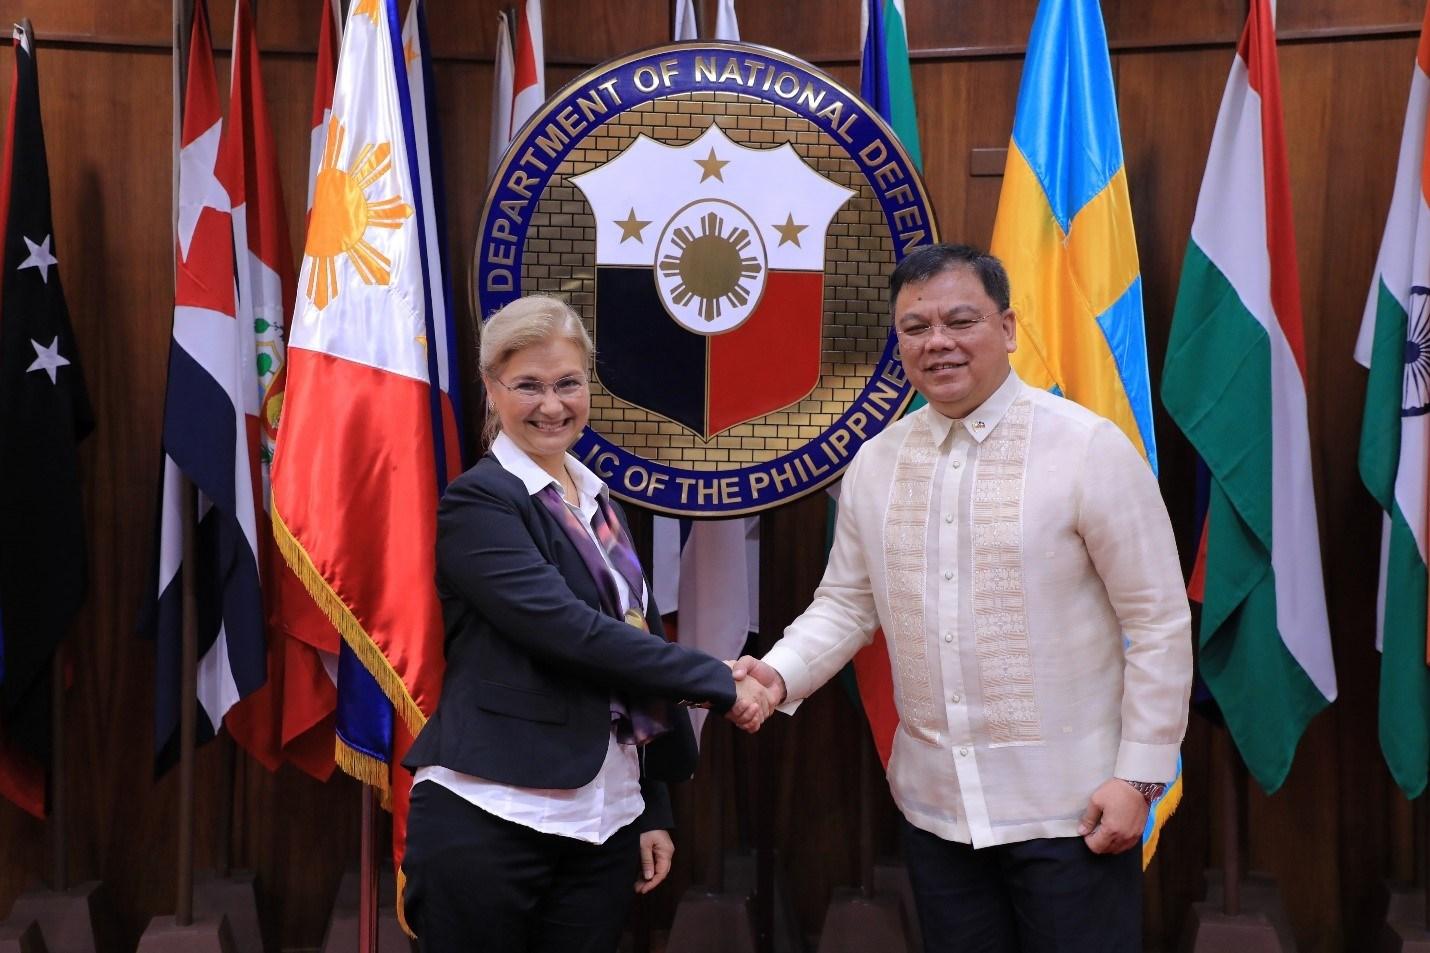 Senior Undersecretary Jose C. Faustino, Jr., Officer-in-Charge (OIC), Department of National Defense (DND), met with H.E. Annika Thunborg, Ambassador of Sweden to the Philippines, during the latter’s courtesy call on 21 December 2022, in Camp General Emilio Aguinaldo, Quezon City. (Photo by Pinky Rose Fernandez/Philippines DND DCOMMS)